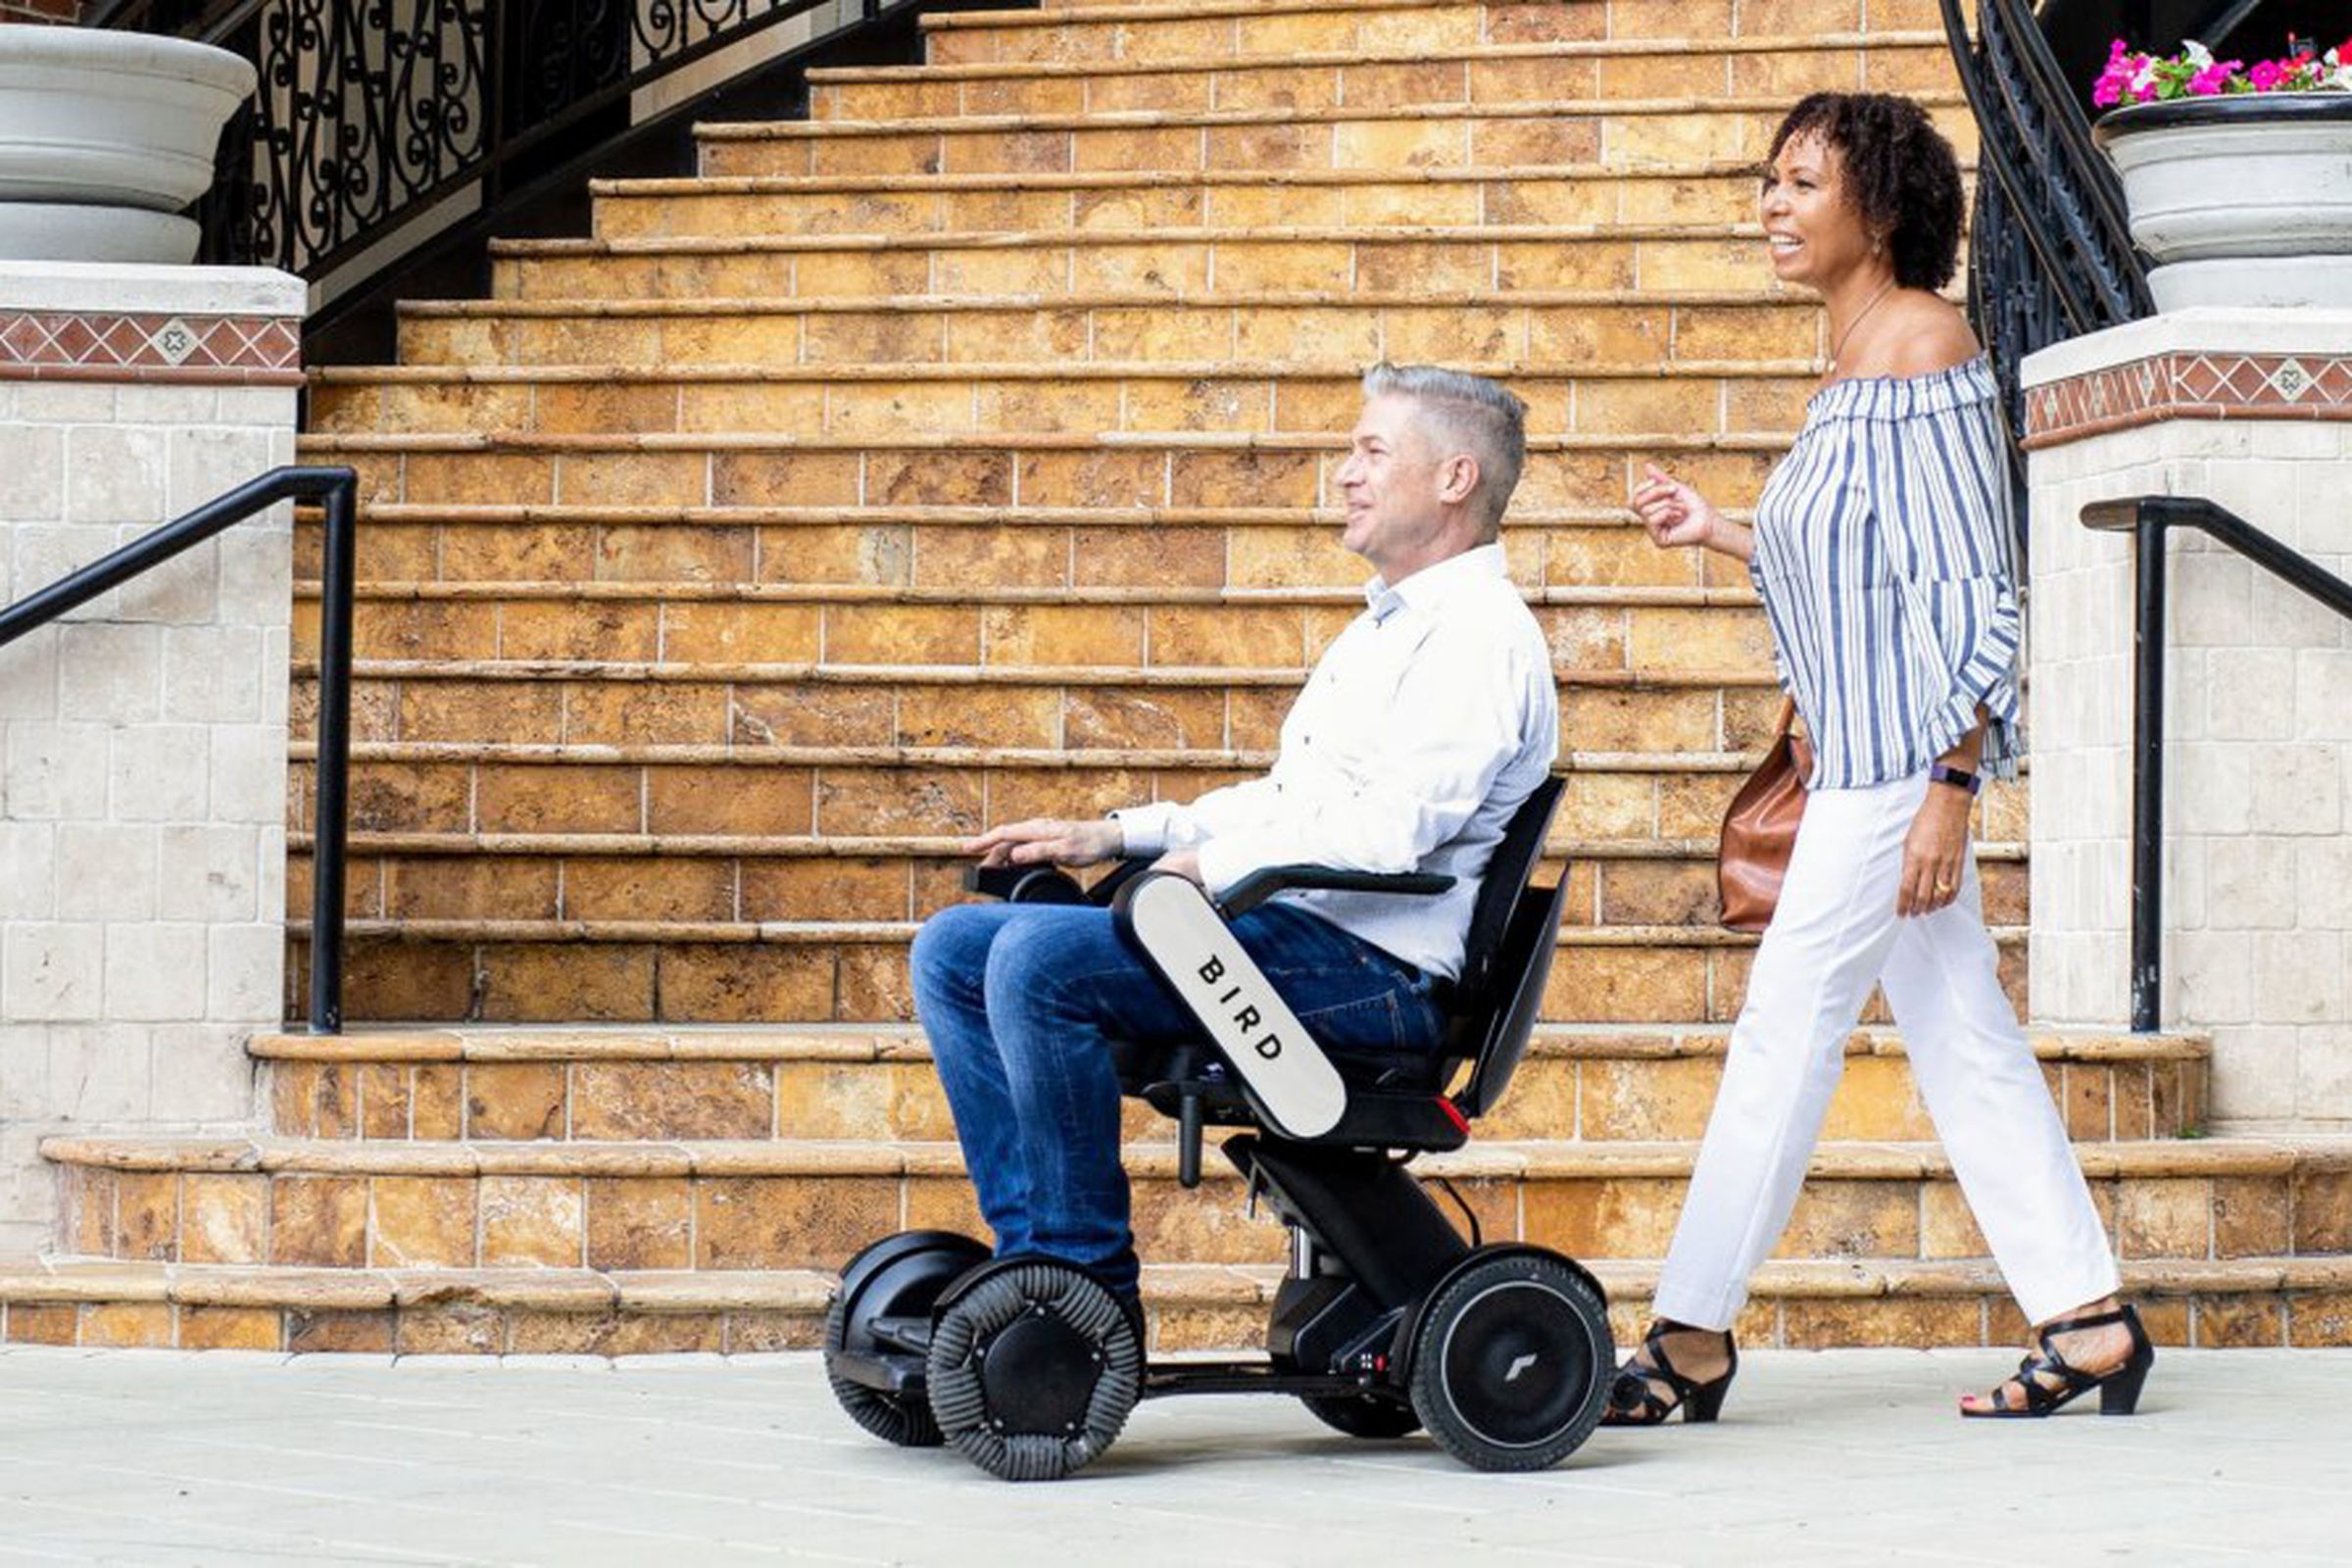 Bird is piloting a mobility scooter rental program in New York City